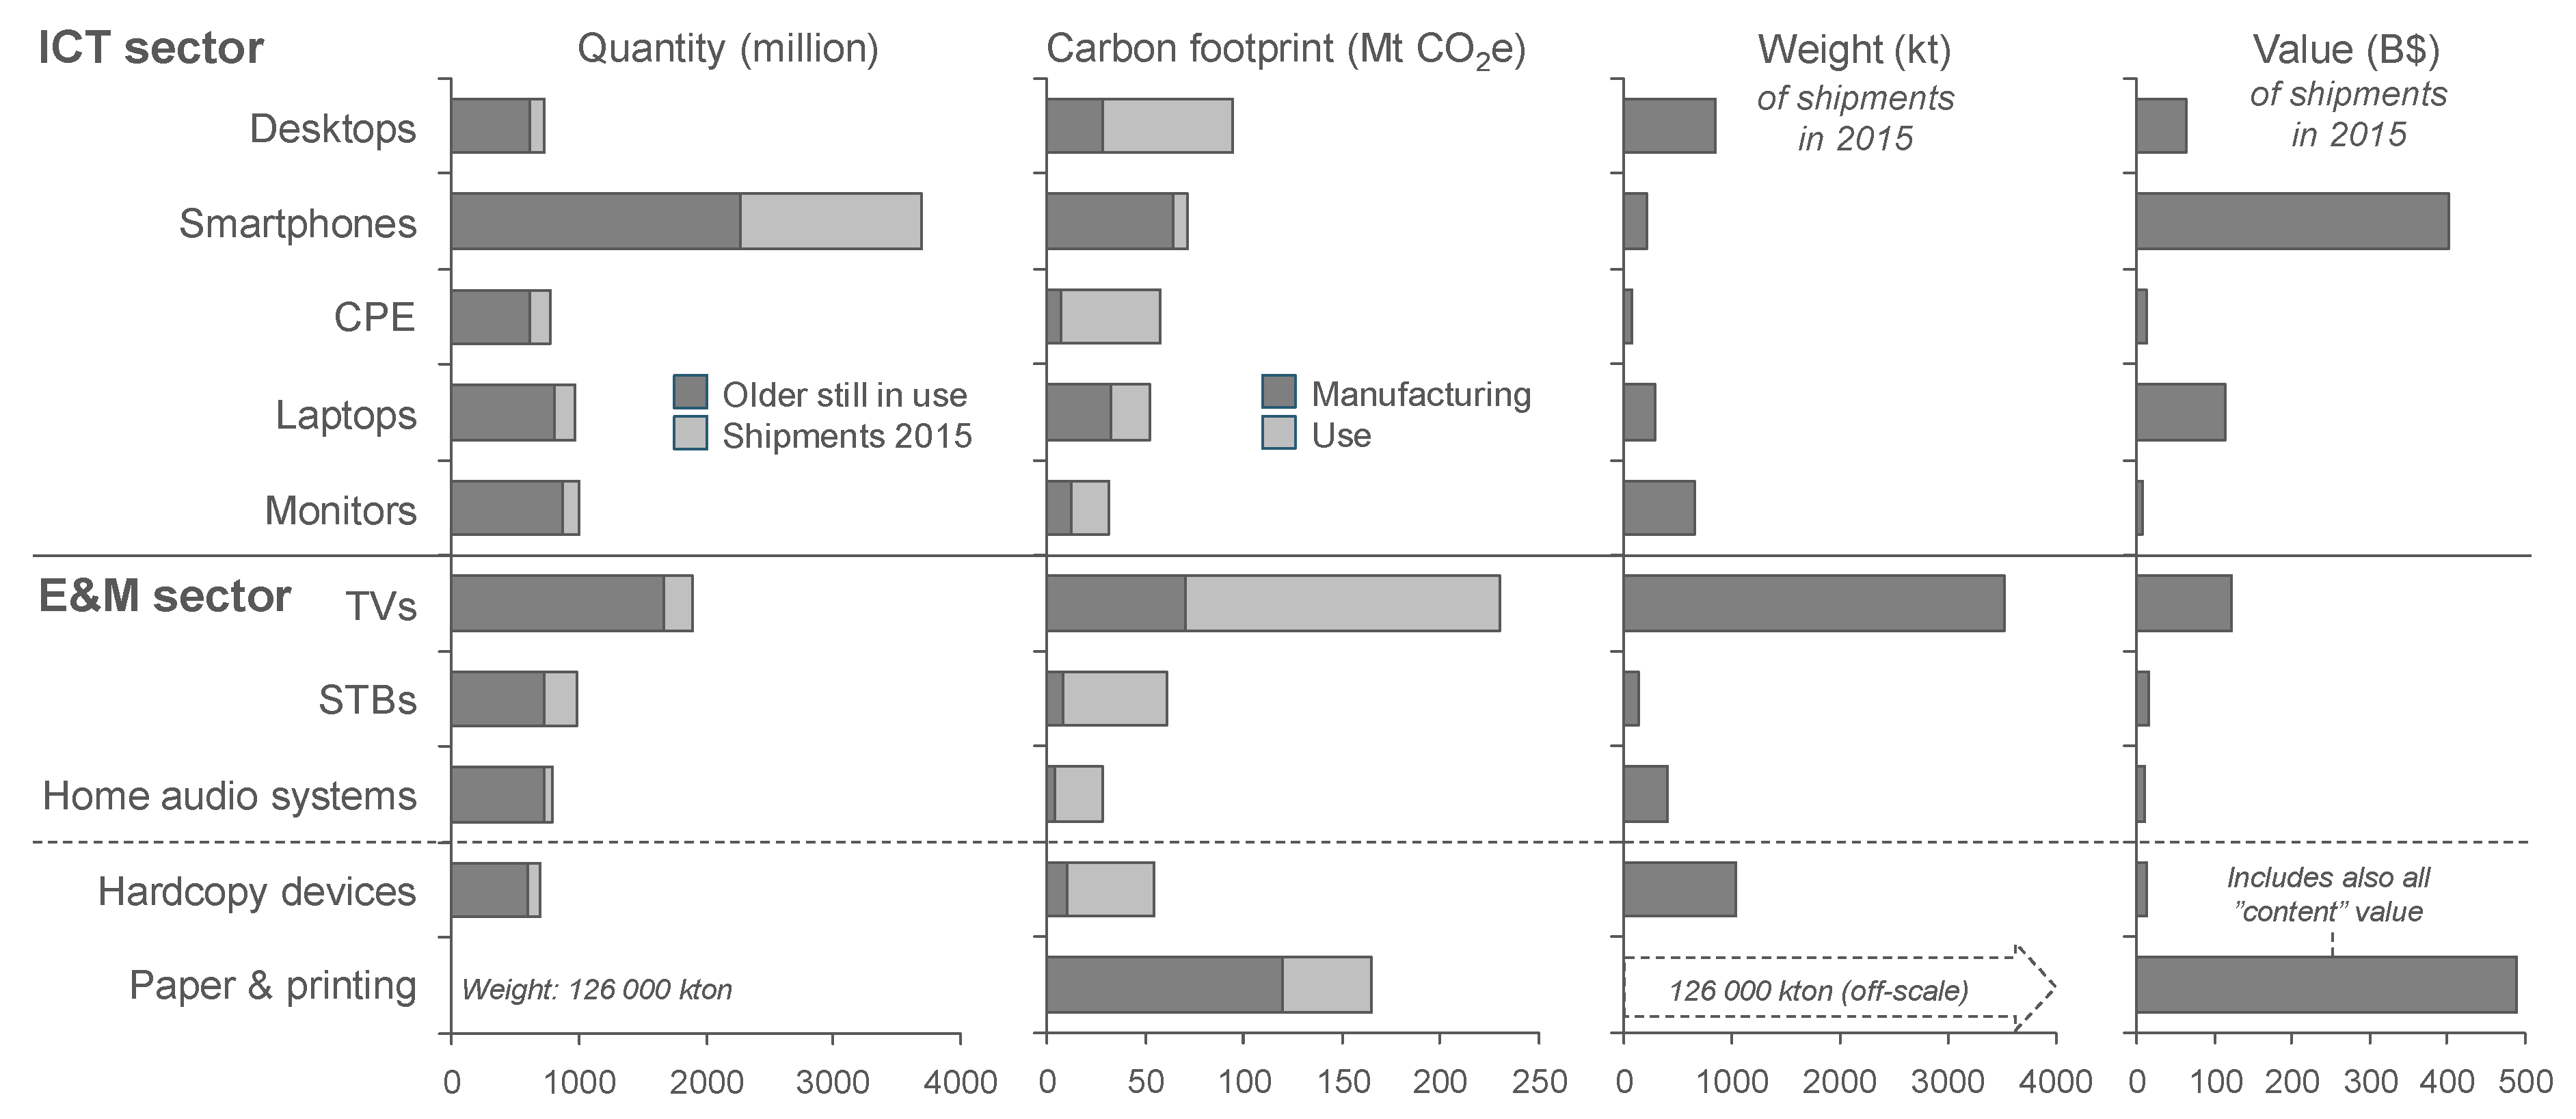 The quantity (volume), carbon footprint, weight, and value for the Information and Communication Technology and Entertainment and Media user devices with the largest carbon footprints. With the paper and hardcopy devices are also included. The estimated total weight for each device type is also shown (note that the total weight of all papers used is out-of-scale.